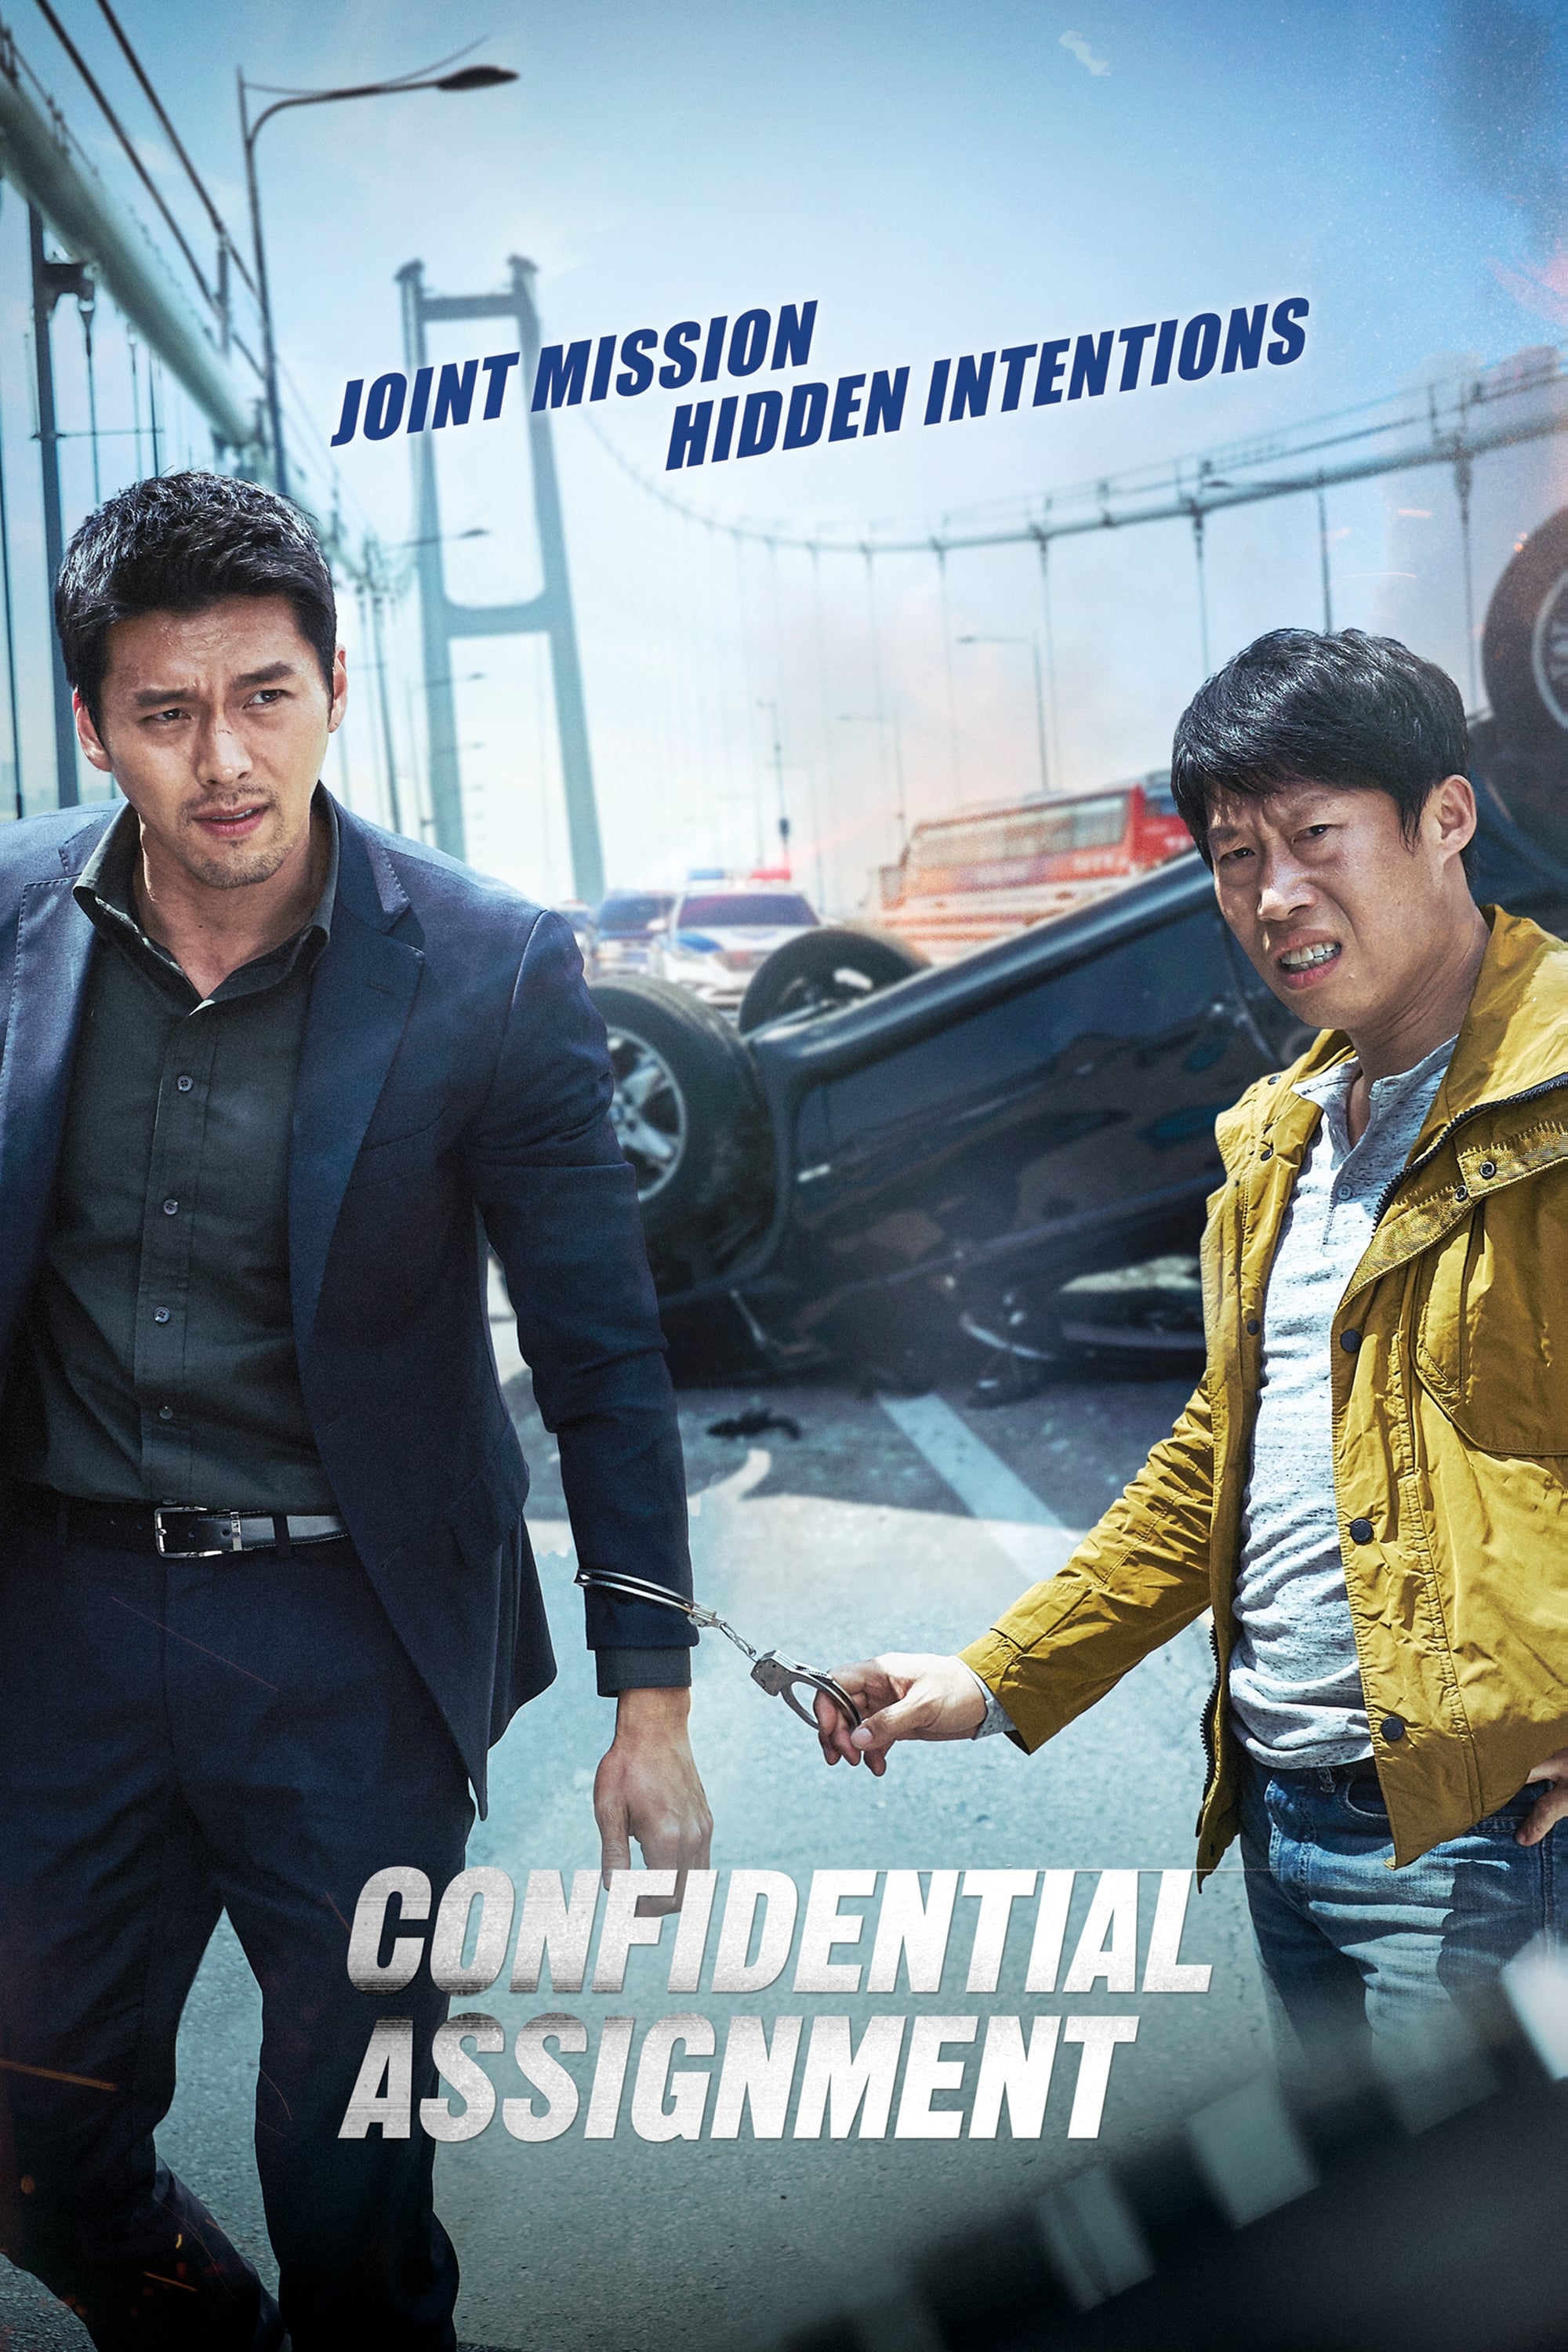 what is confidential assignment movie about